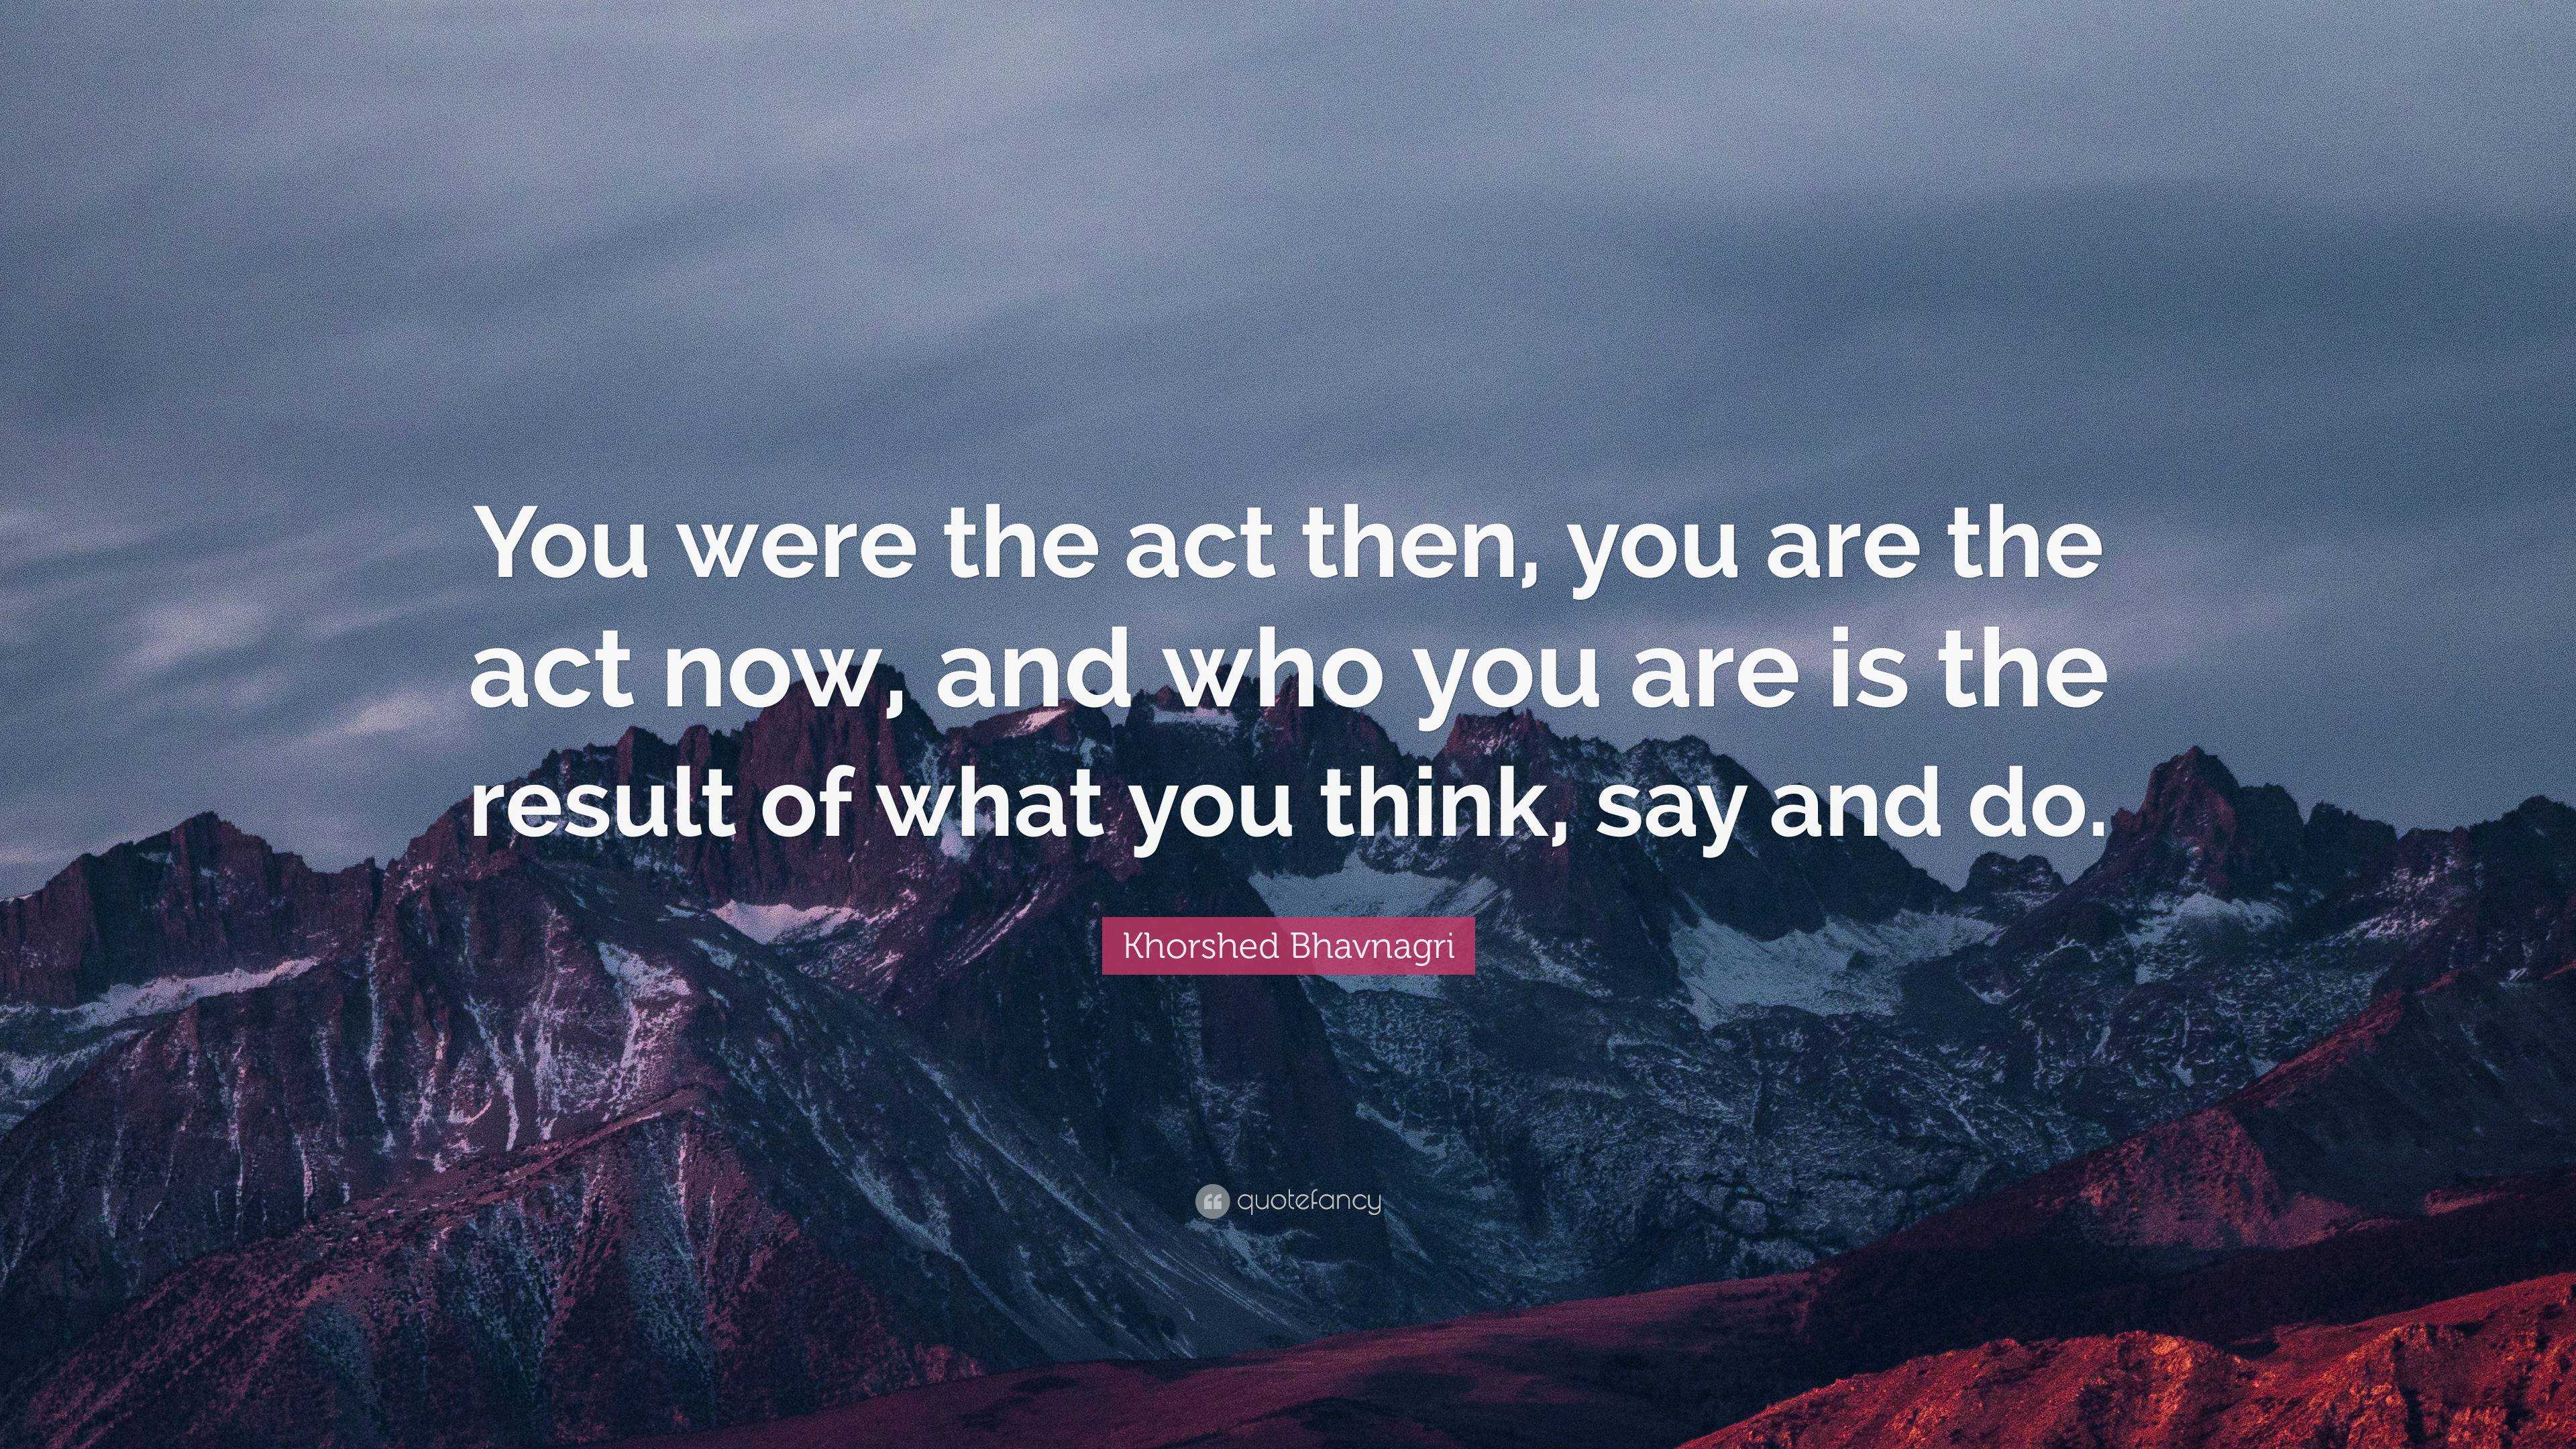 Khorshed Bhavnagri Quote: “You were the act then, you are the act now ...